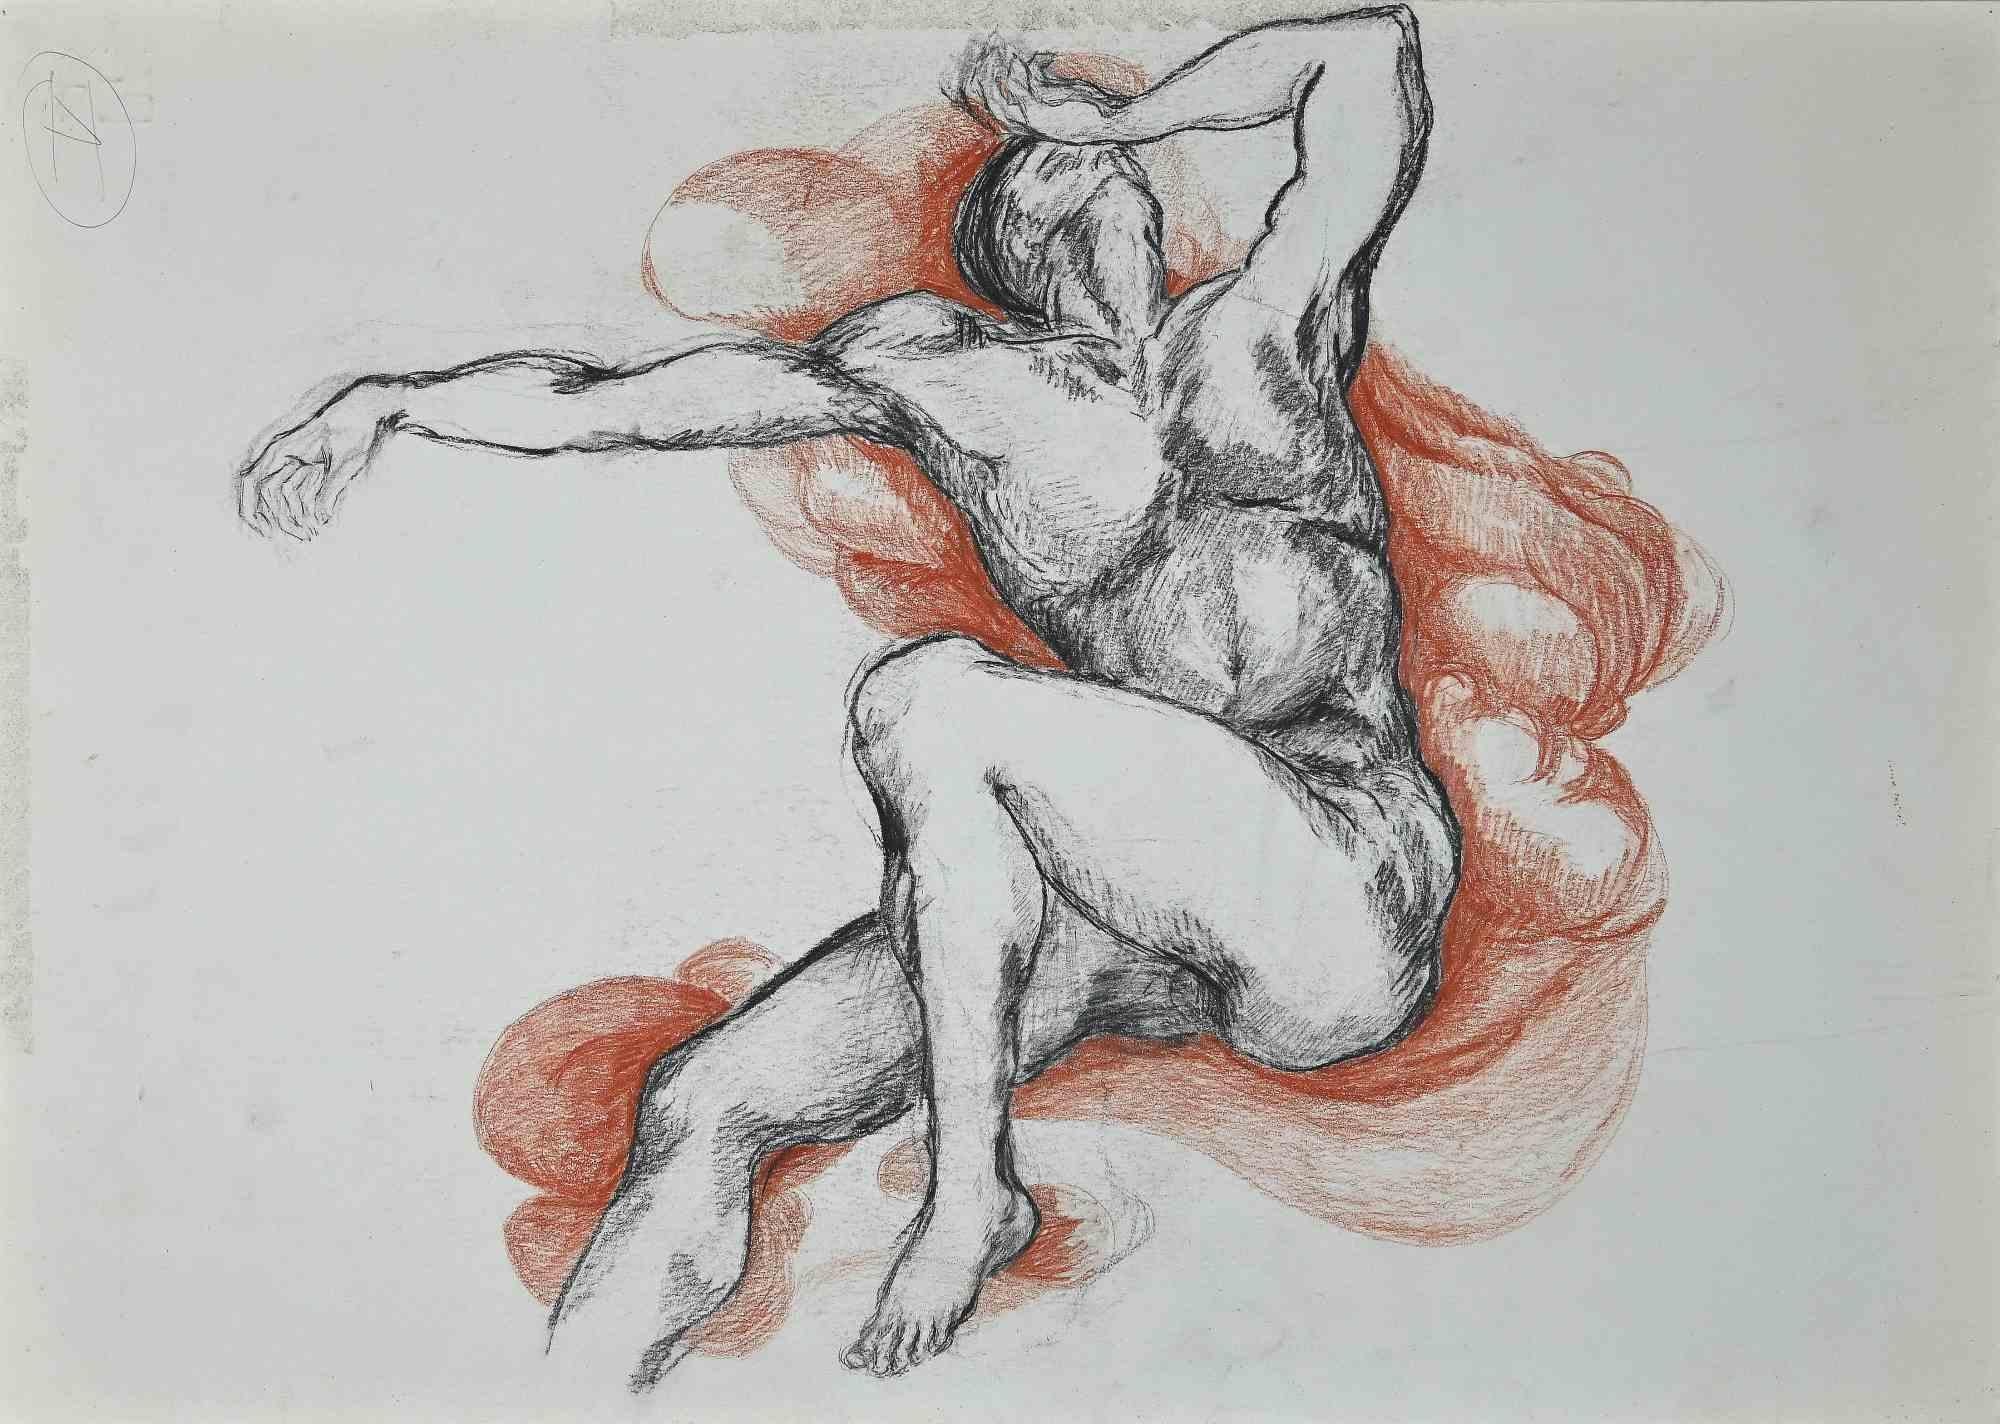 Unknown Figurative Art - Nude Model - Pastel on Paper - Mid-20th Century